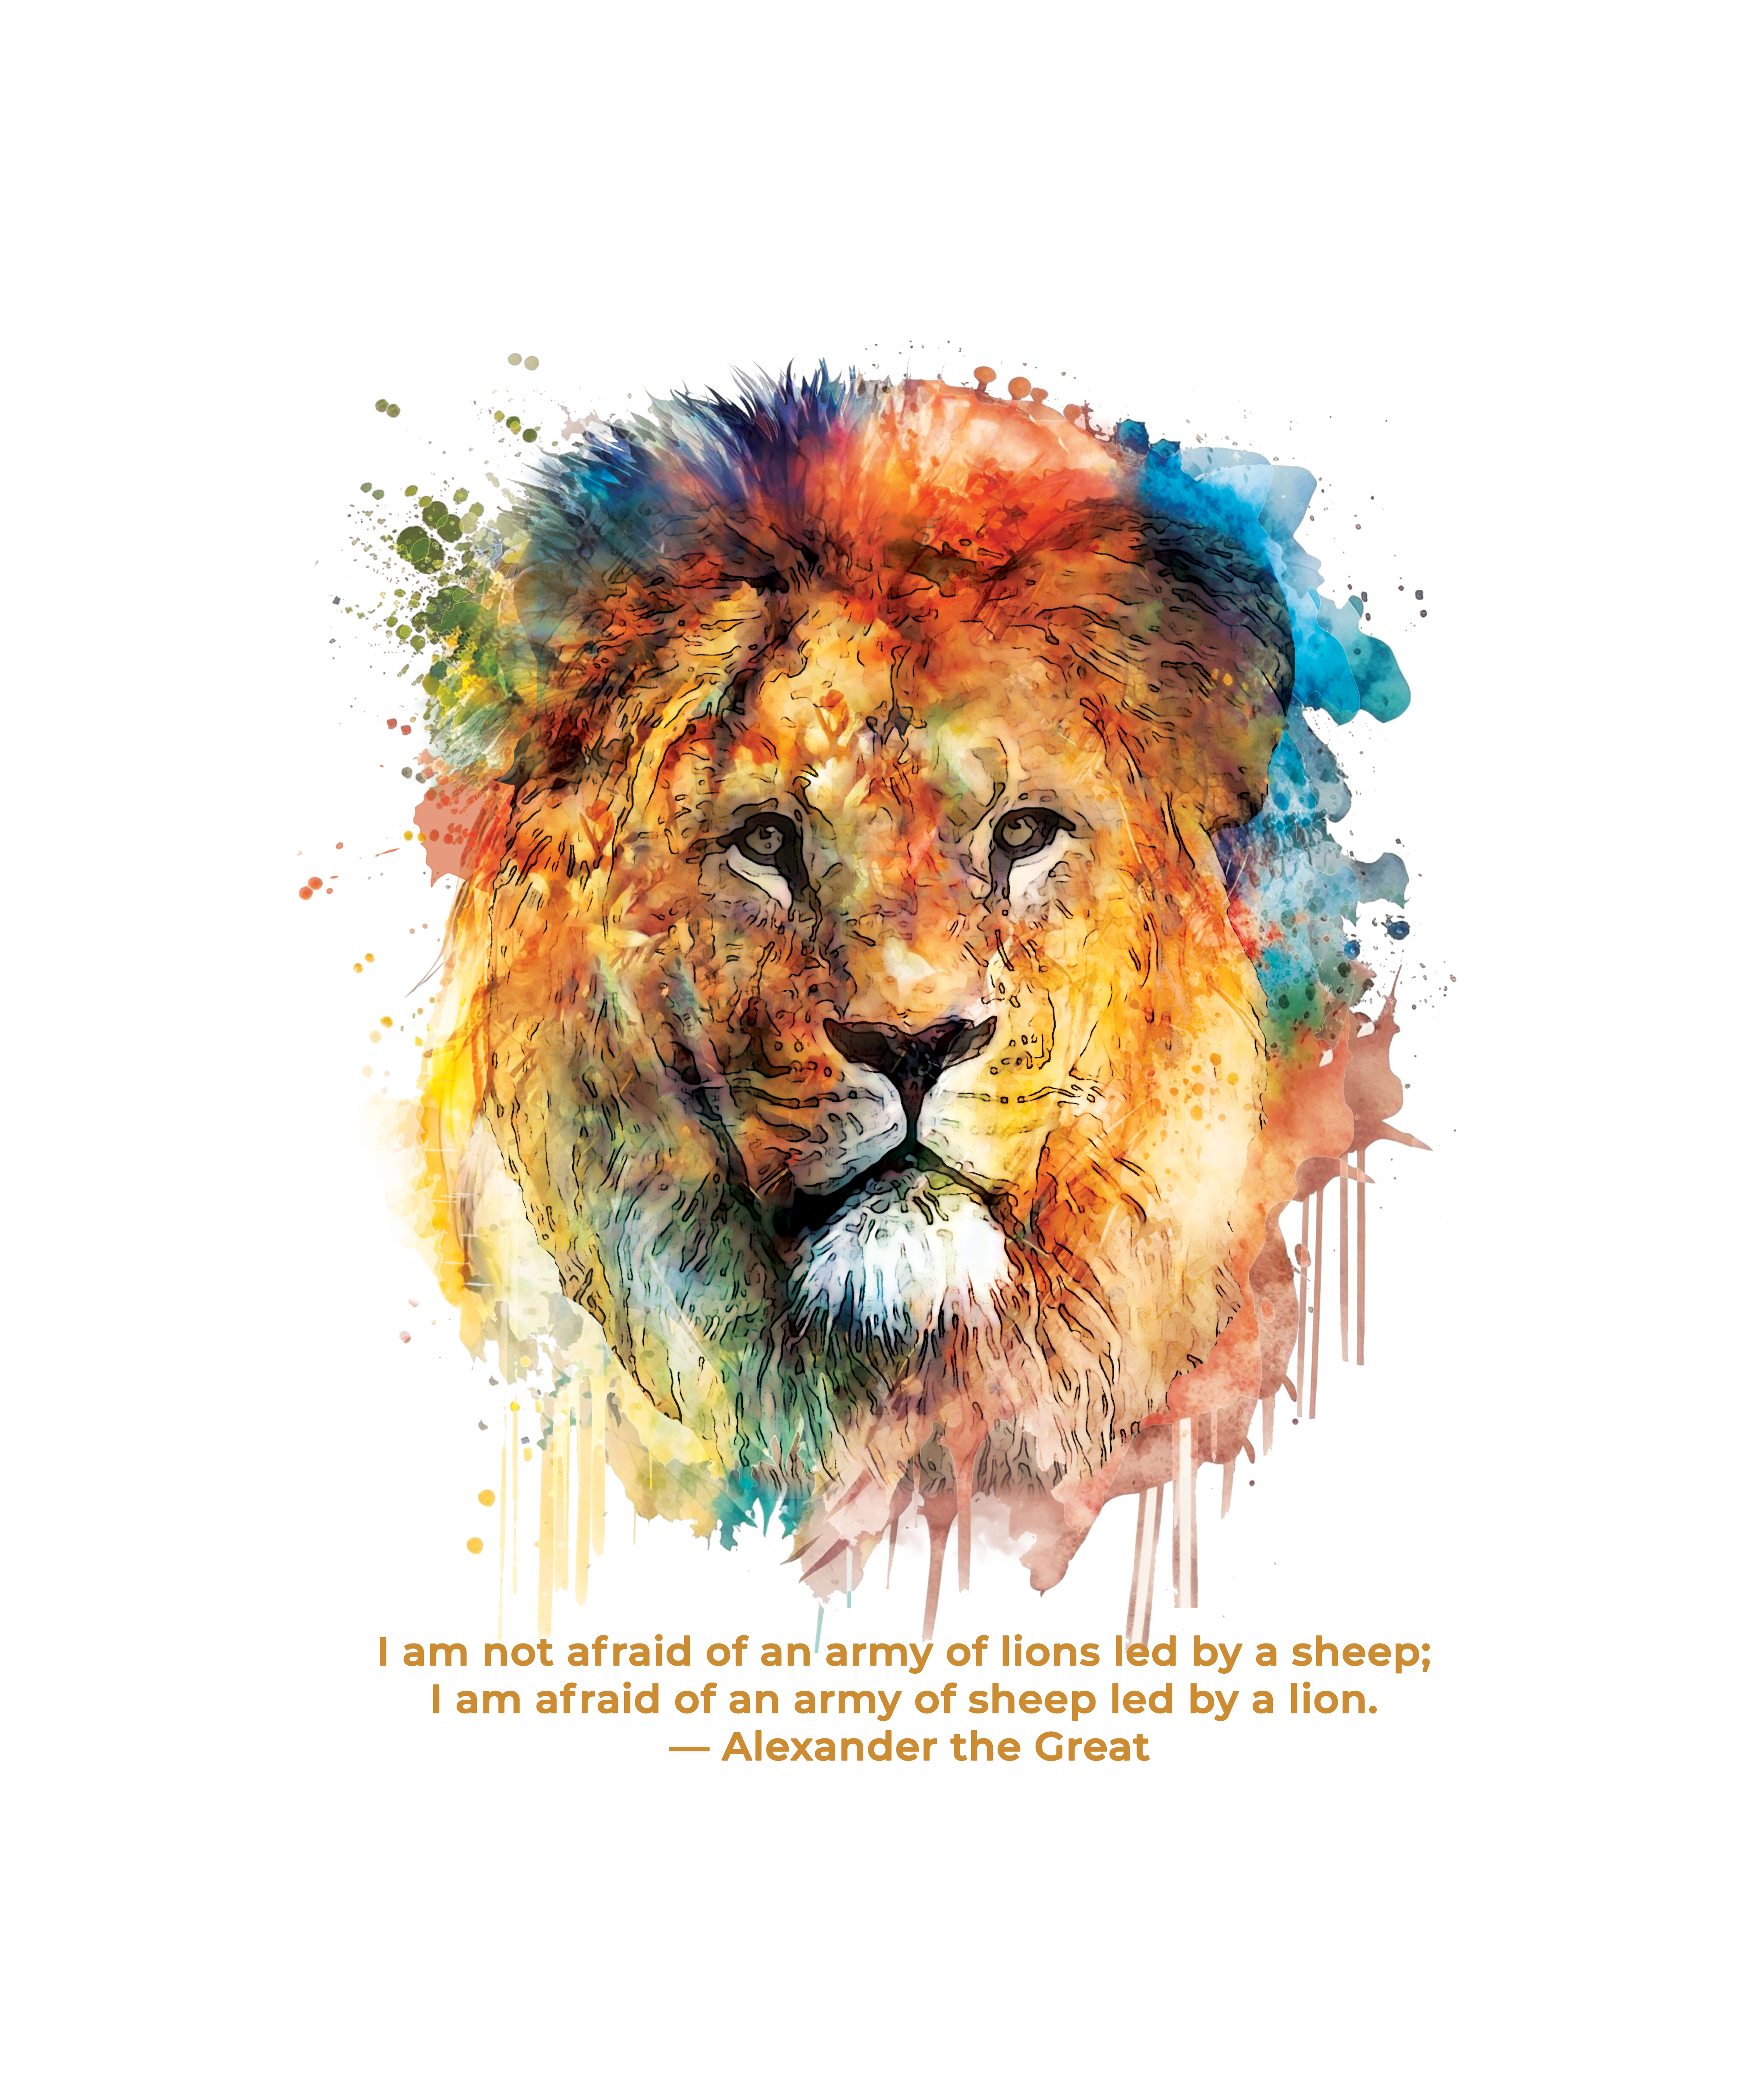 On SALE: Freedom Fighter, Lion T-Shirts, Warrior Beast Fitness Attire & Art/Books/Prints/ Free Poetry